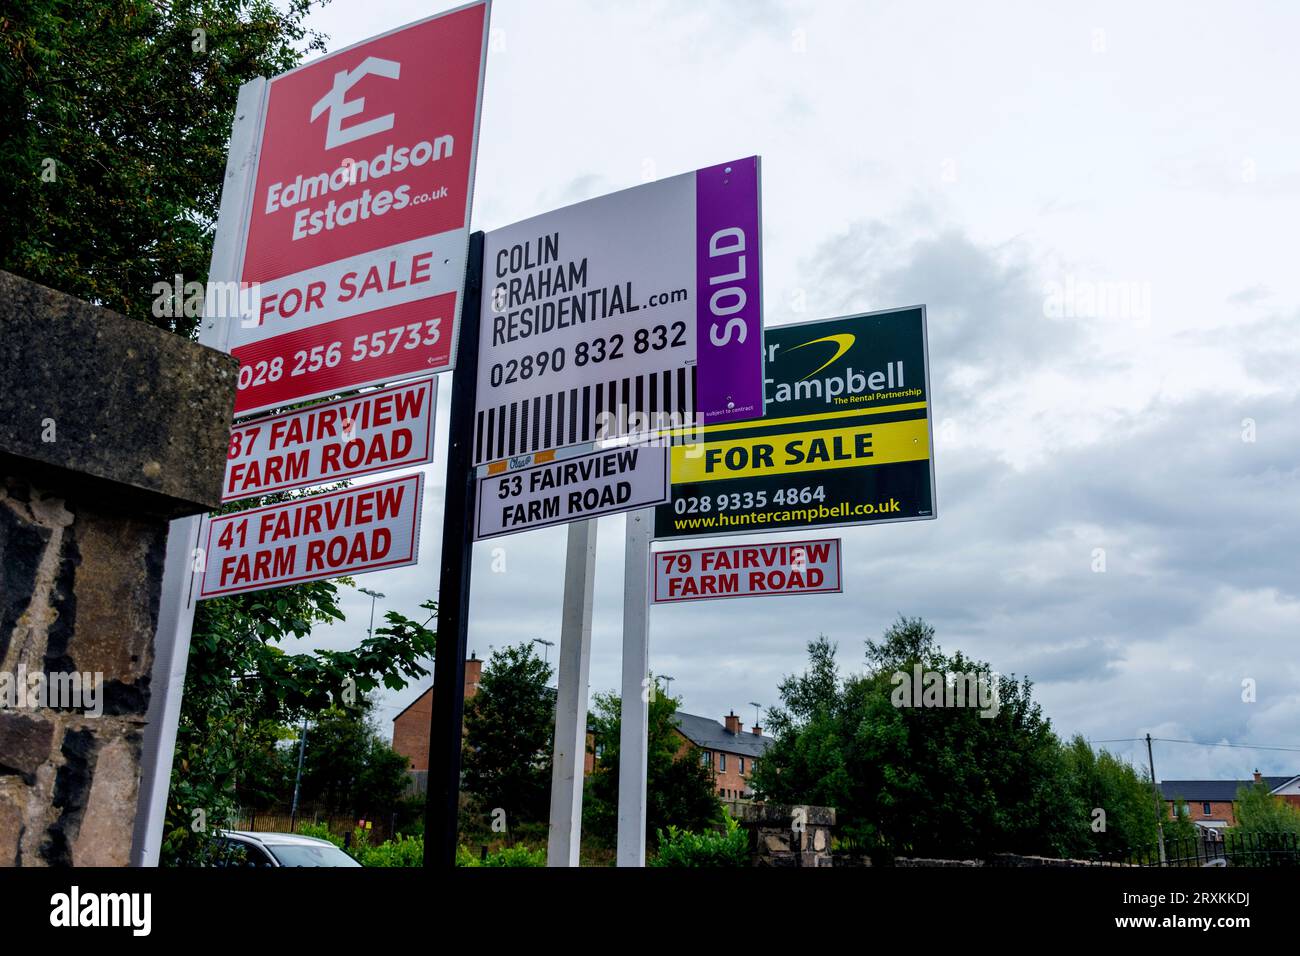 Property housing sold or for sale signage in Ballyclare, Northern Ireland Stock Photo